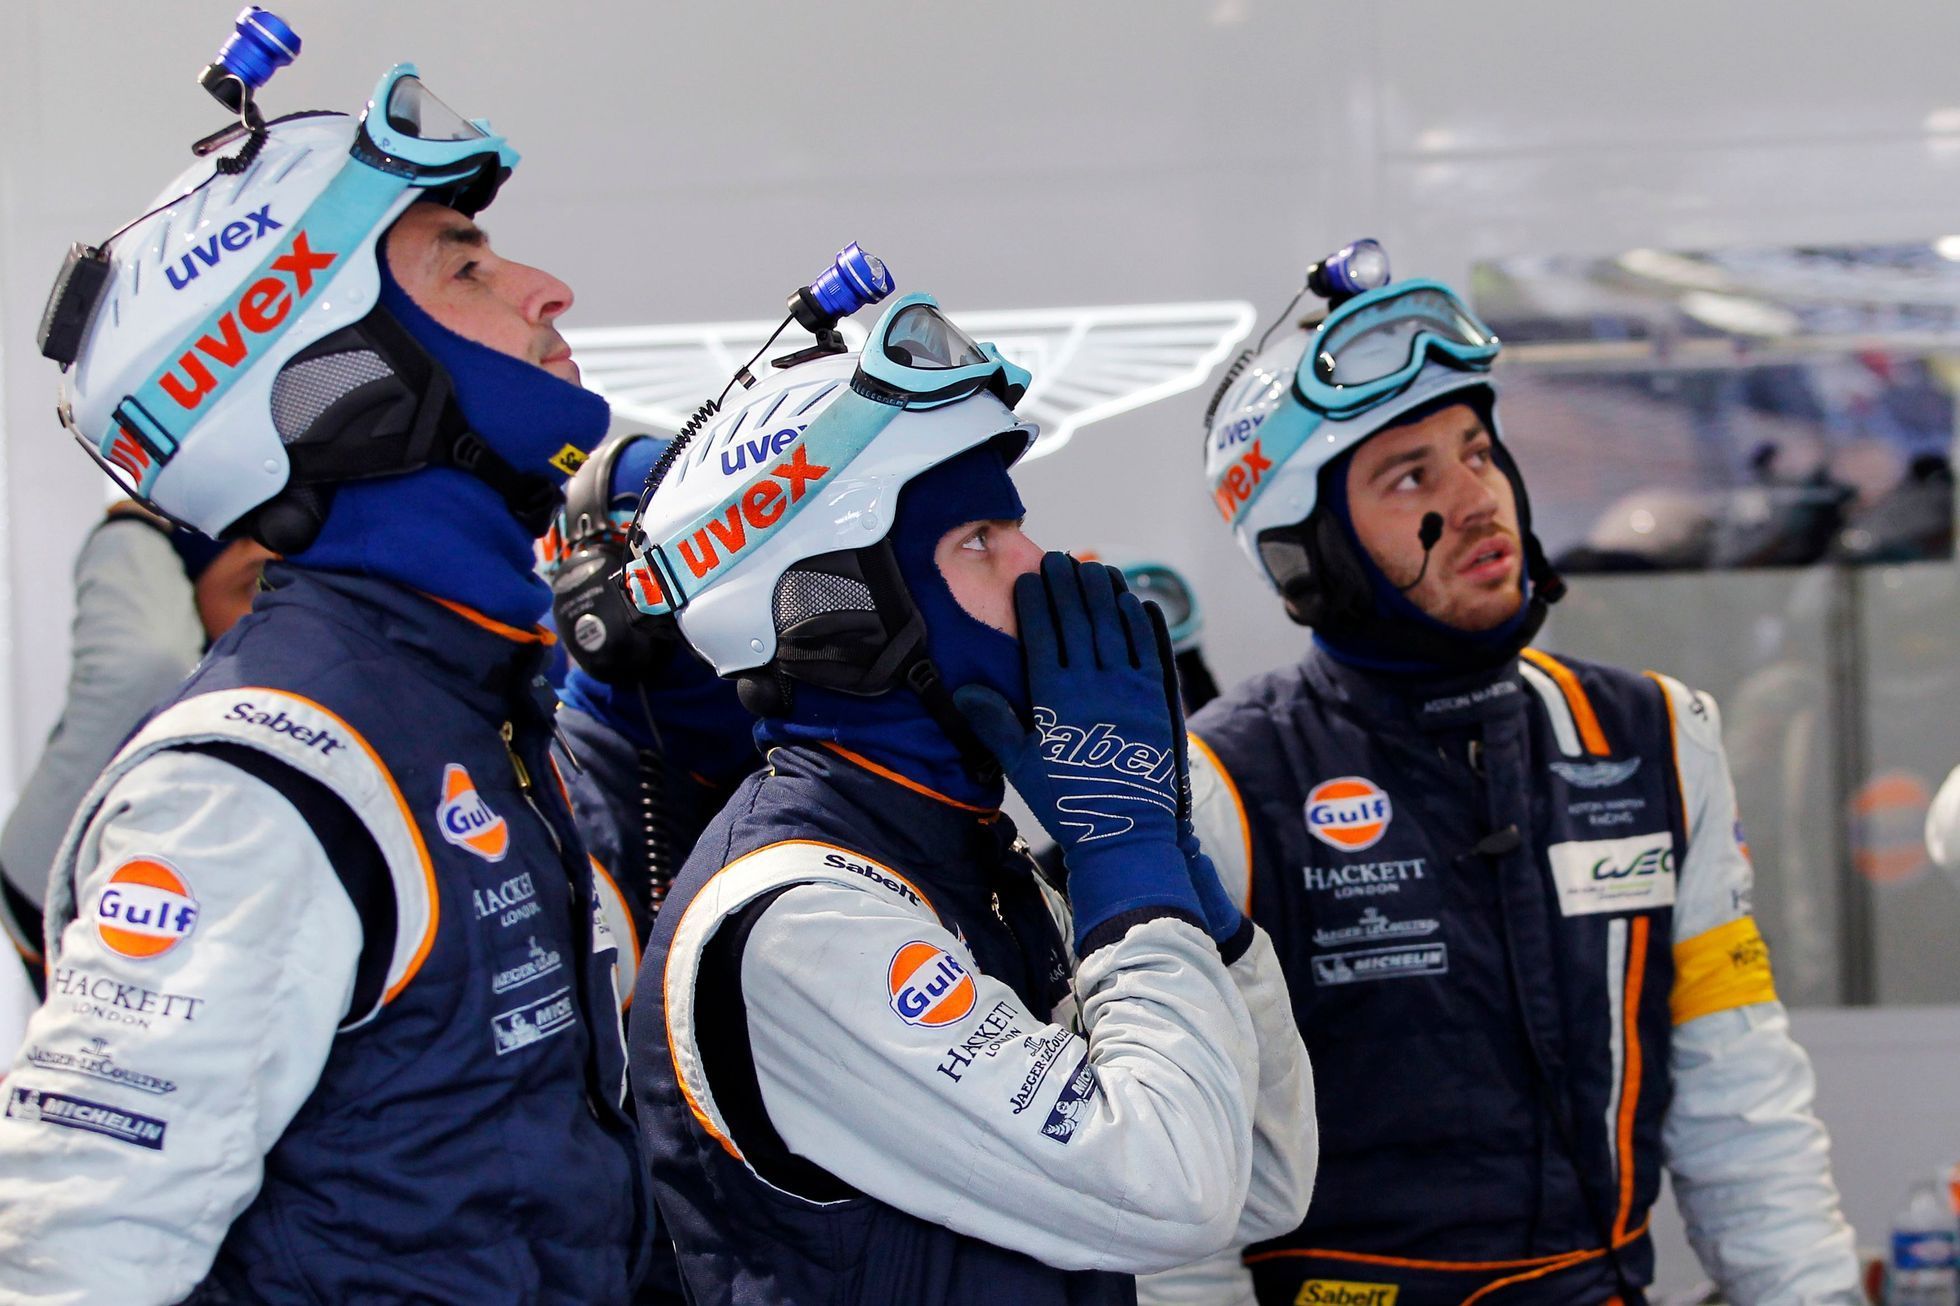 Crew members of the Aston Martin Vantage GTE Number 99 react